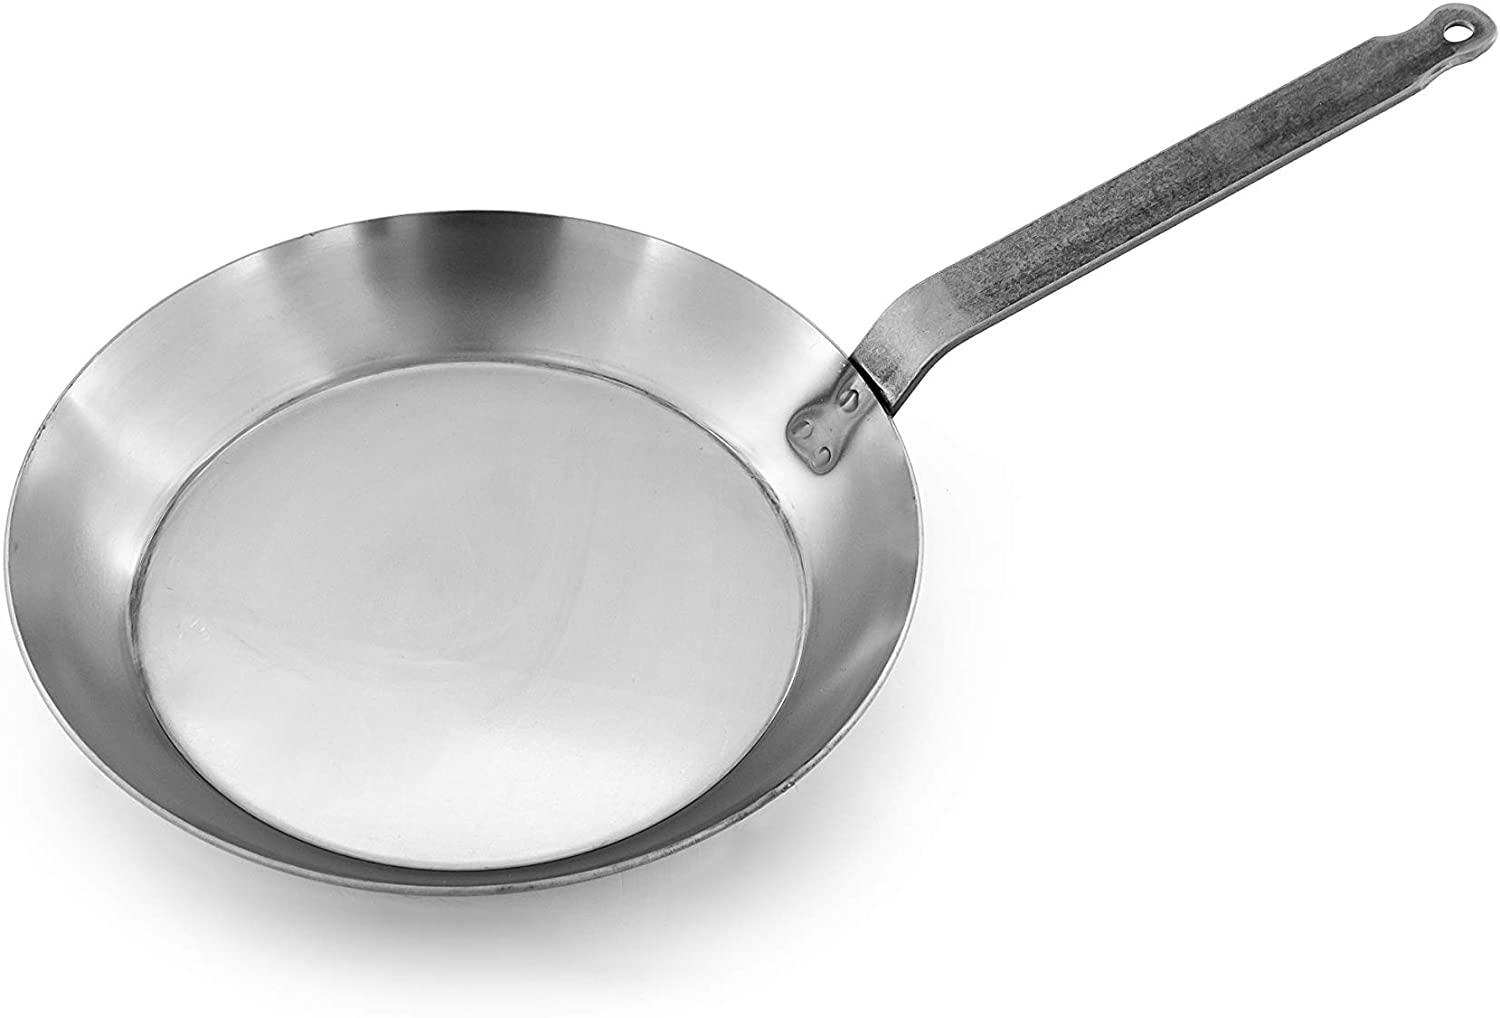 Matfer Bourgeat 9.5" Black Carbon Steel Fry Pan for $28.99 Shipped